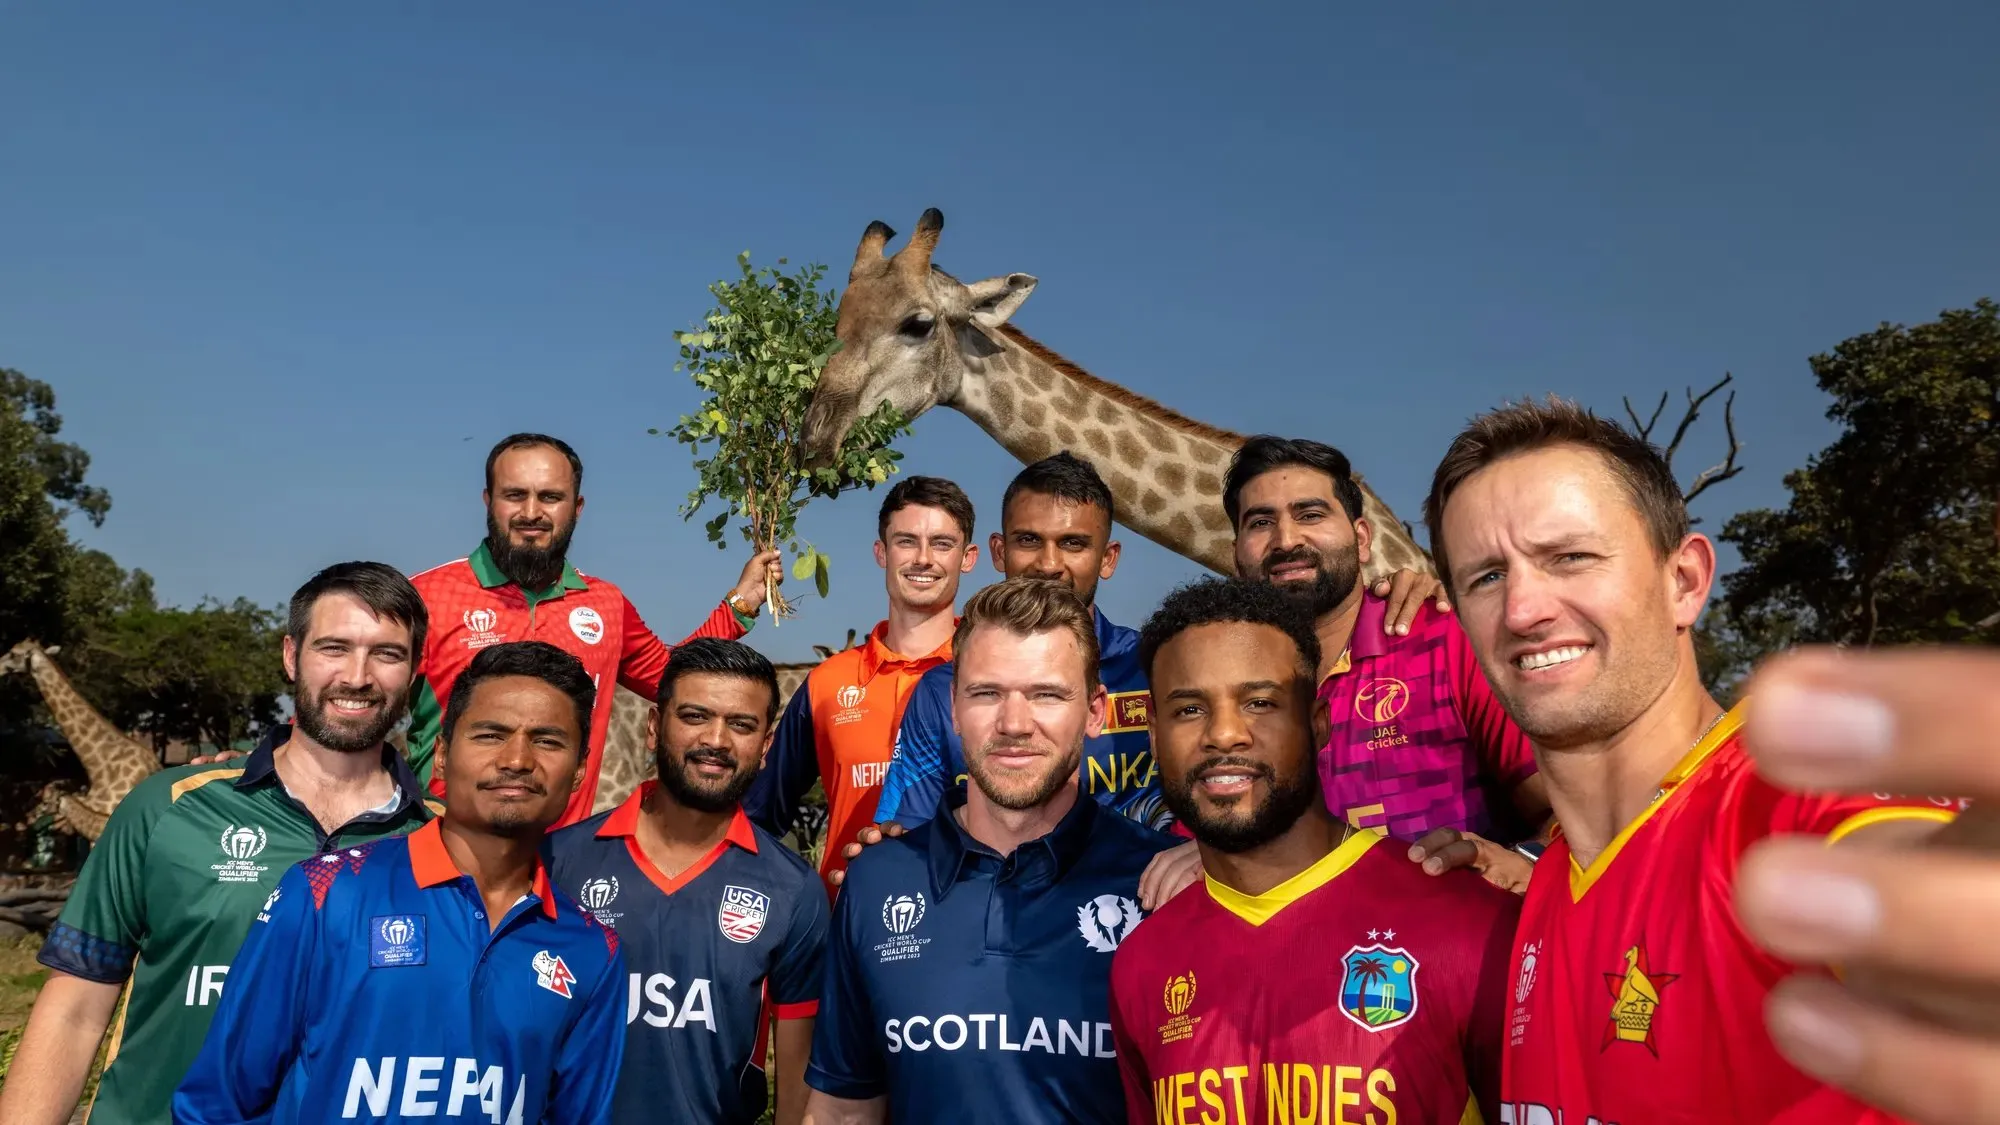 The captain's pose for a selfie during the Captain's Photocall prior to the ICC Men's Cricket World Cup Qualifier Zimbabwe 2023 at Wild is Life Sanctuary on June 16, 2023 in Harare, Zimbabwe.   Image | ICC